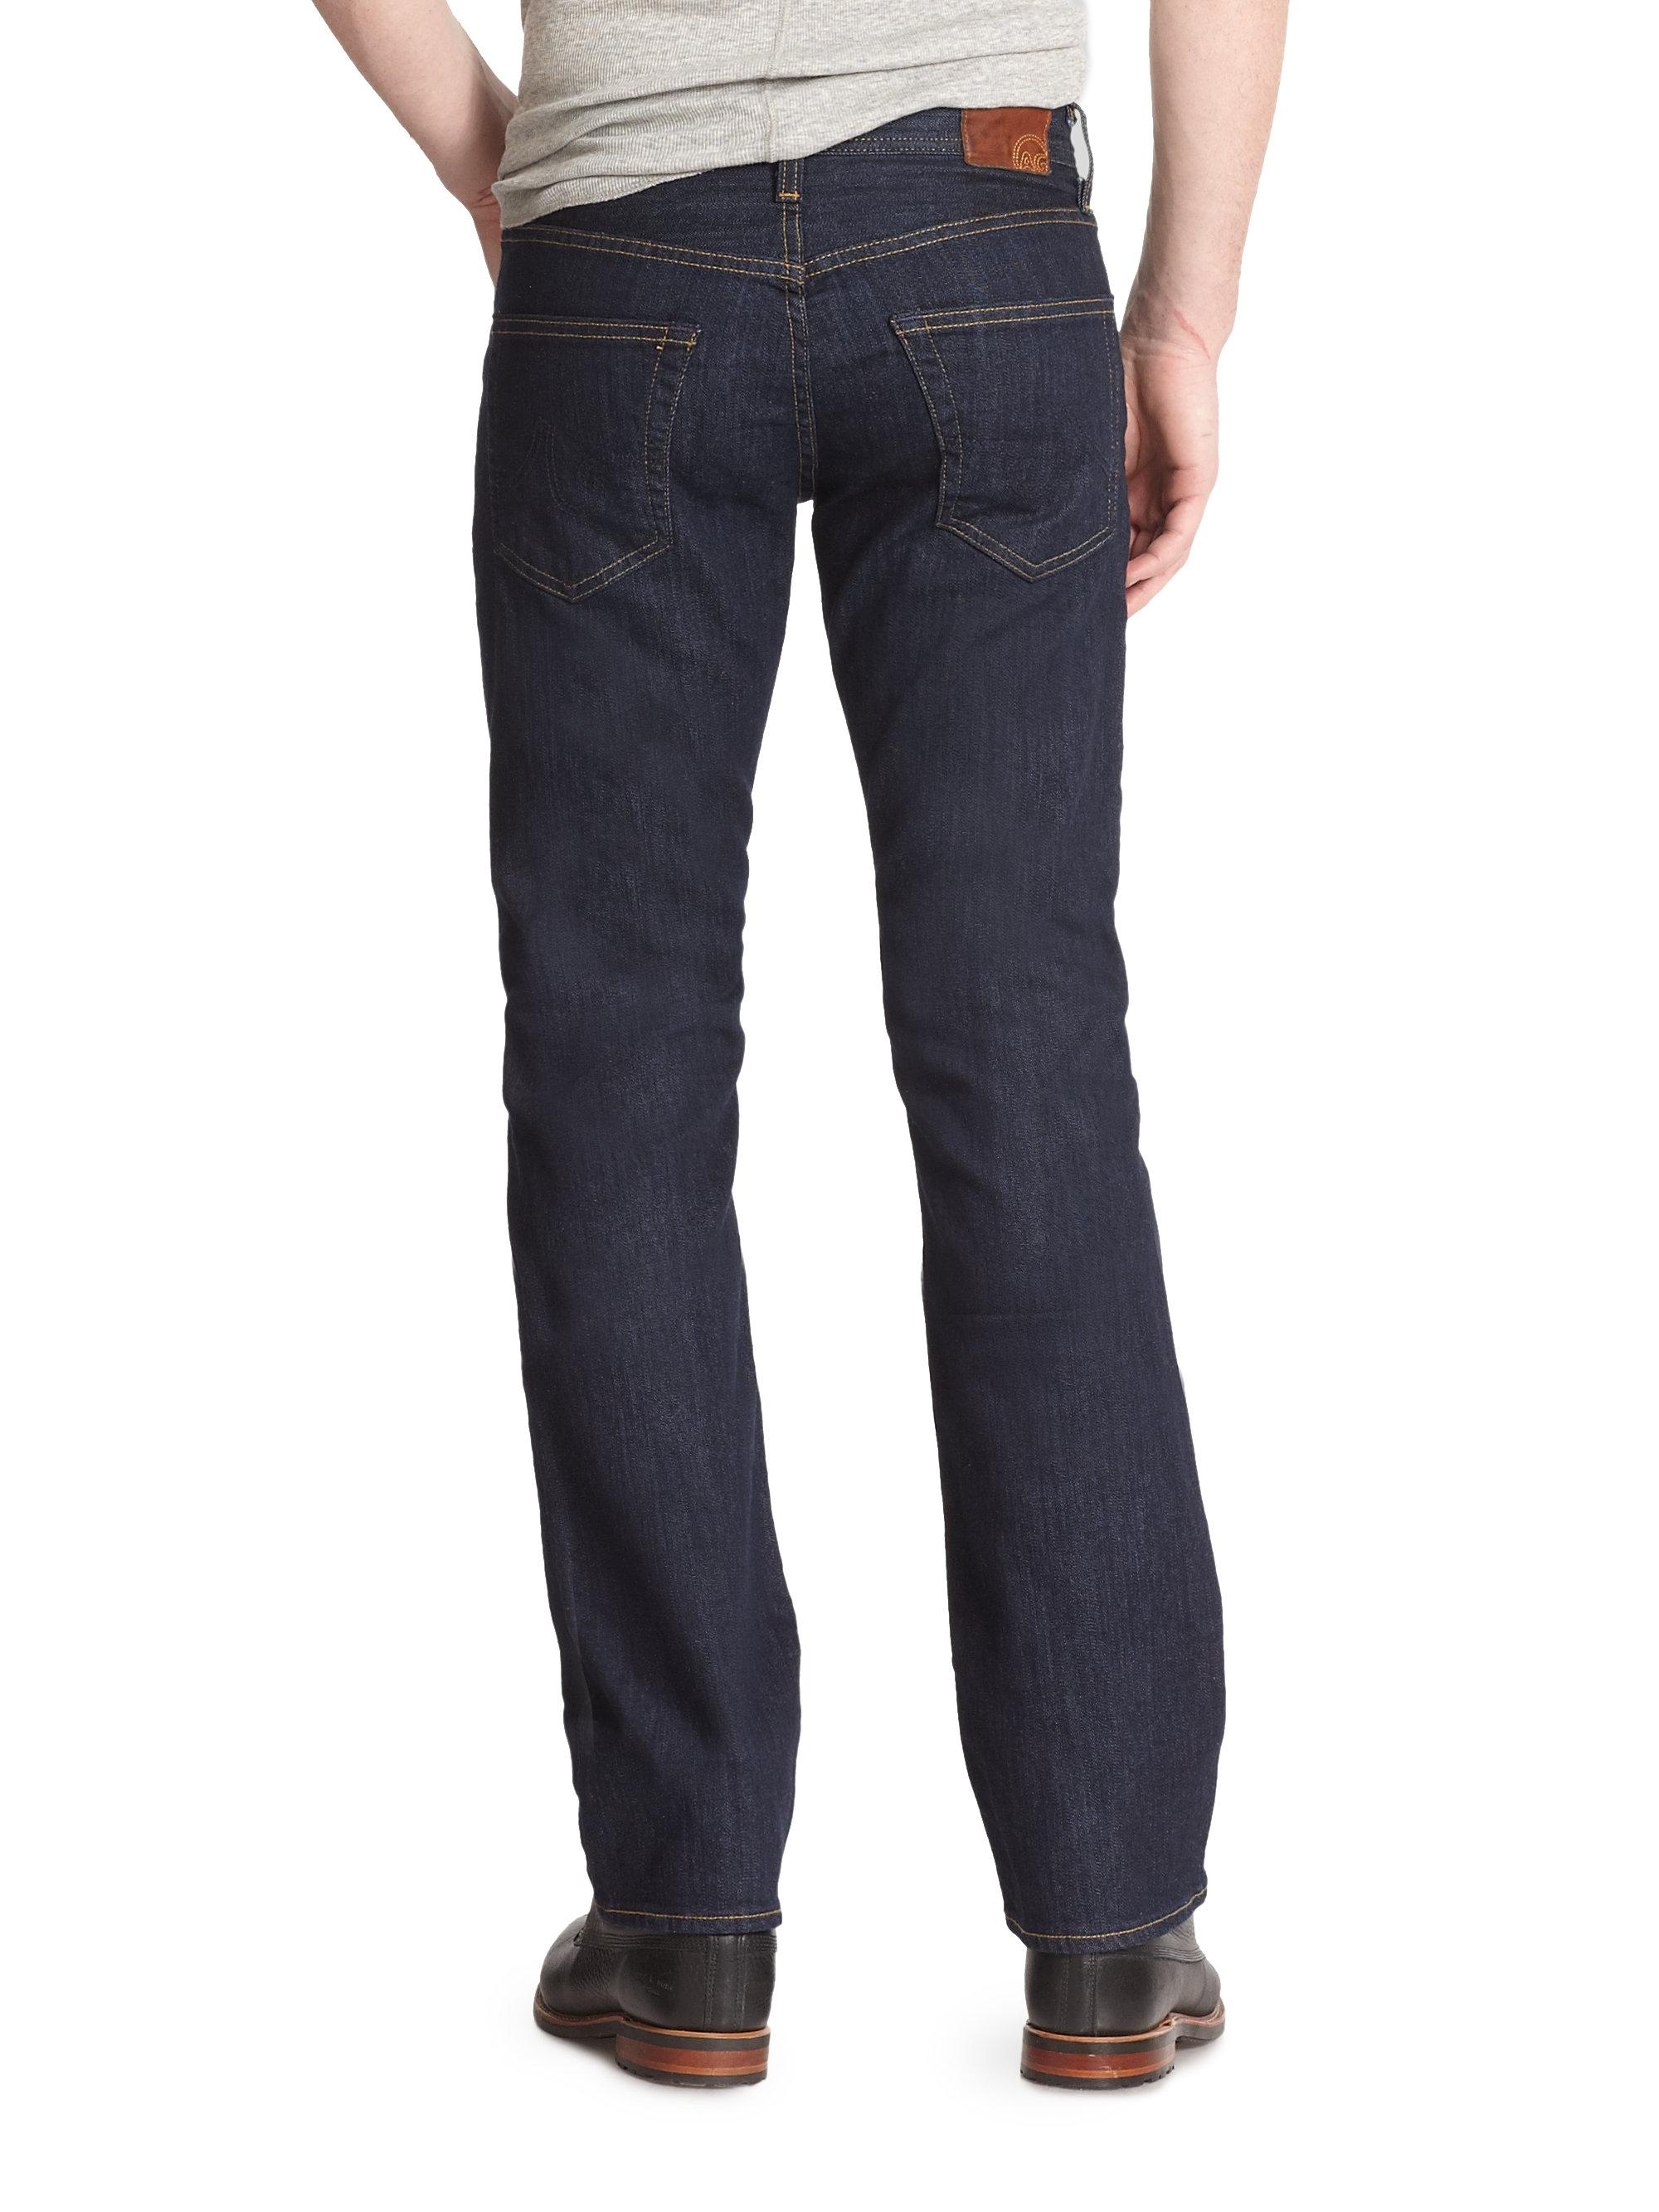 Lyst - Ag Jeans Protege Straight Leg Jeans in Blue for Men